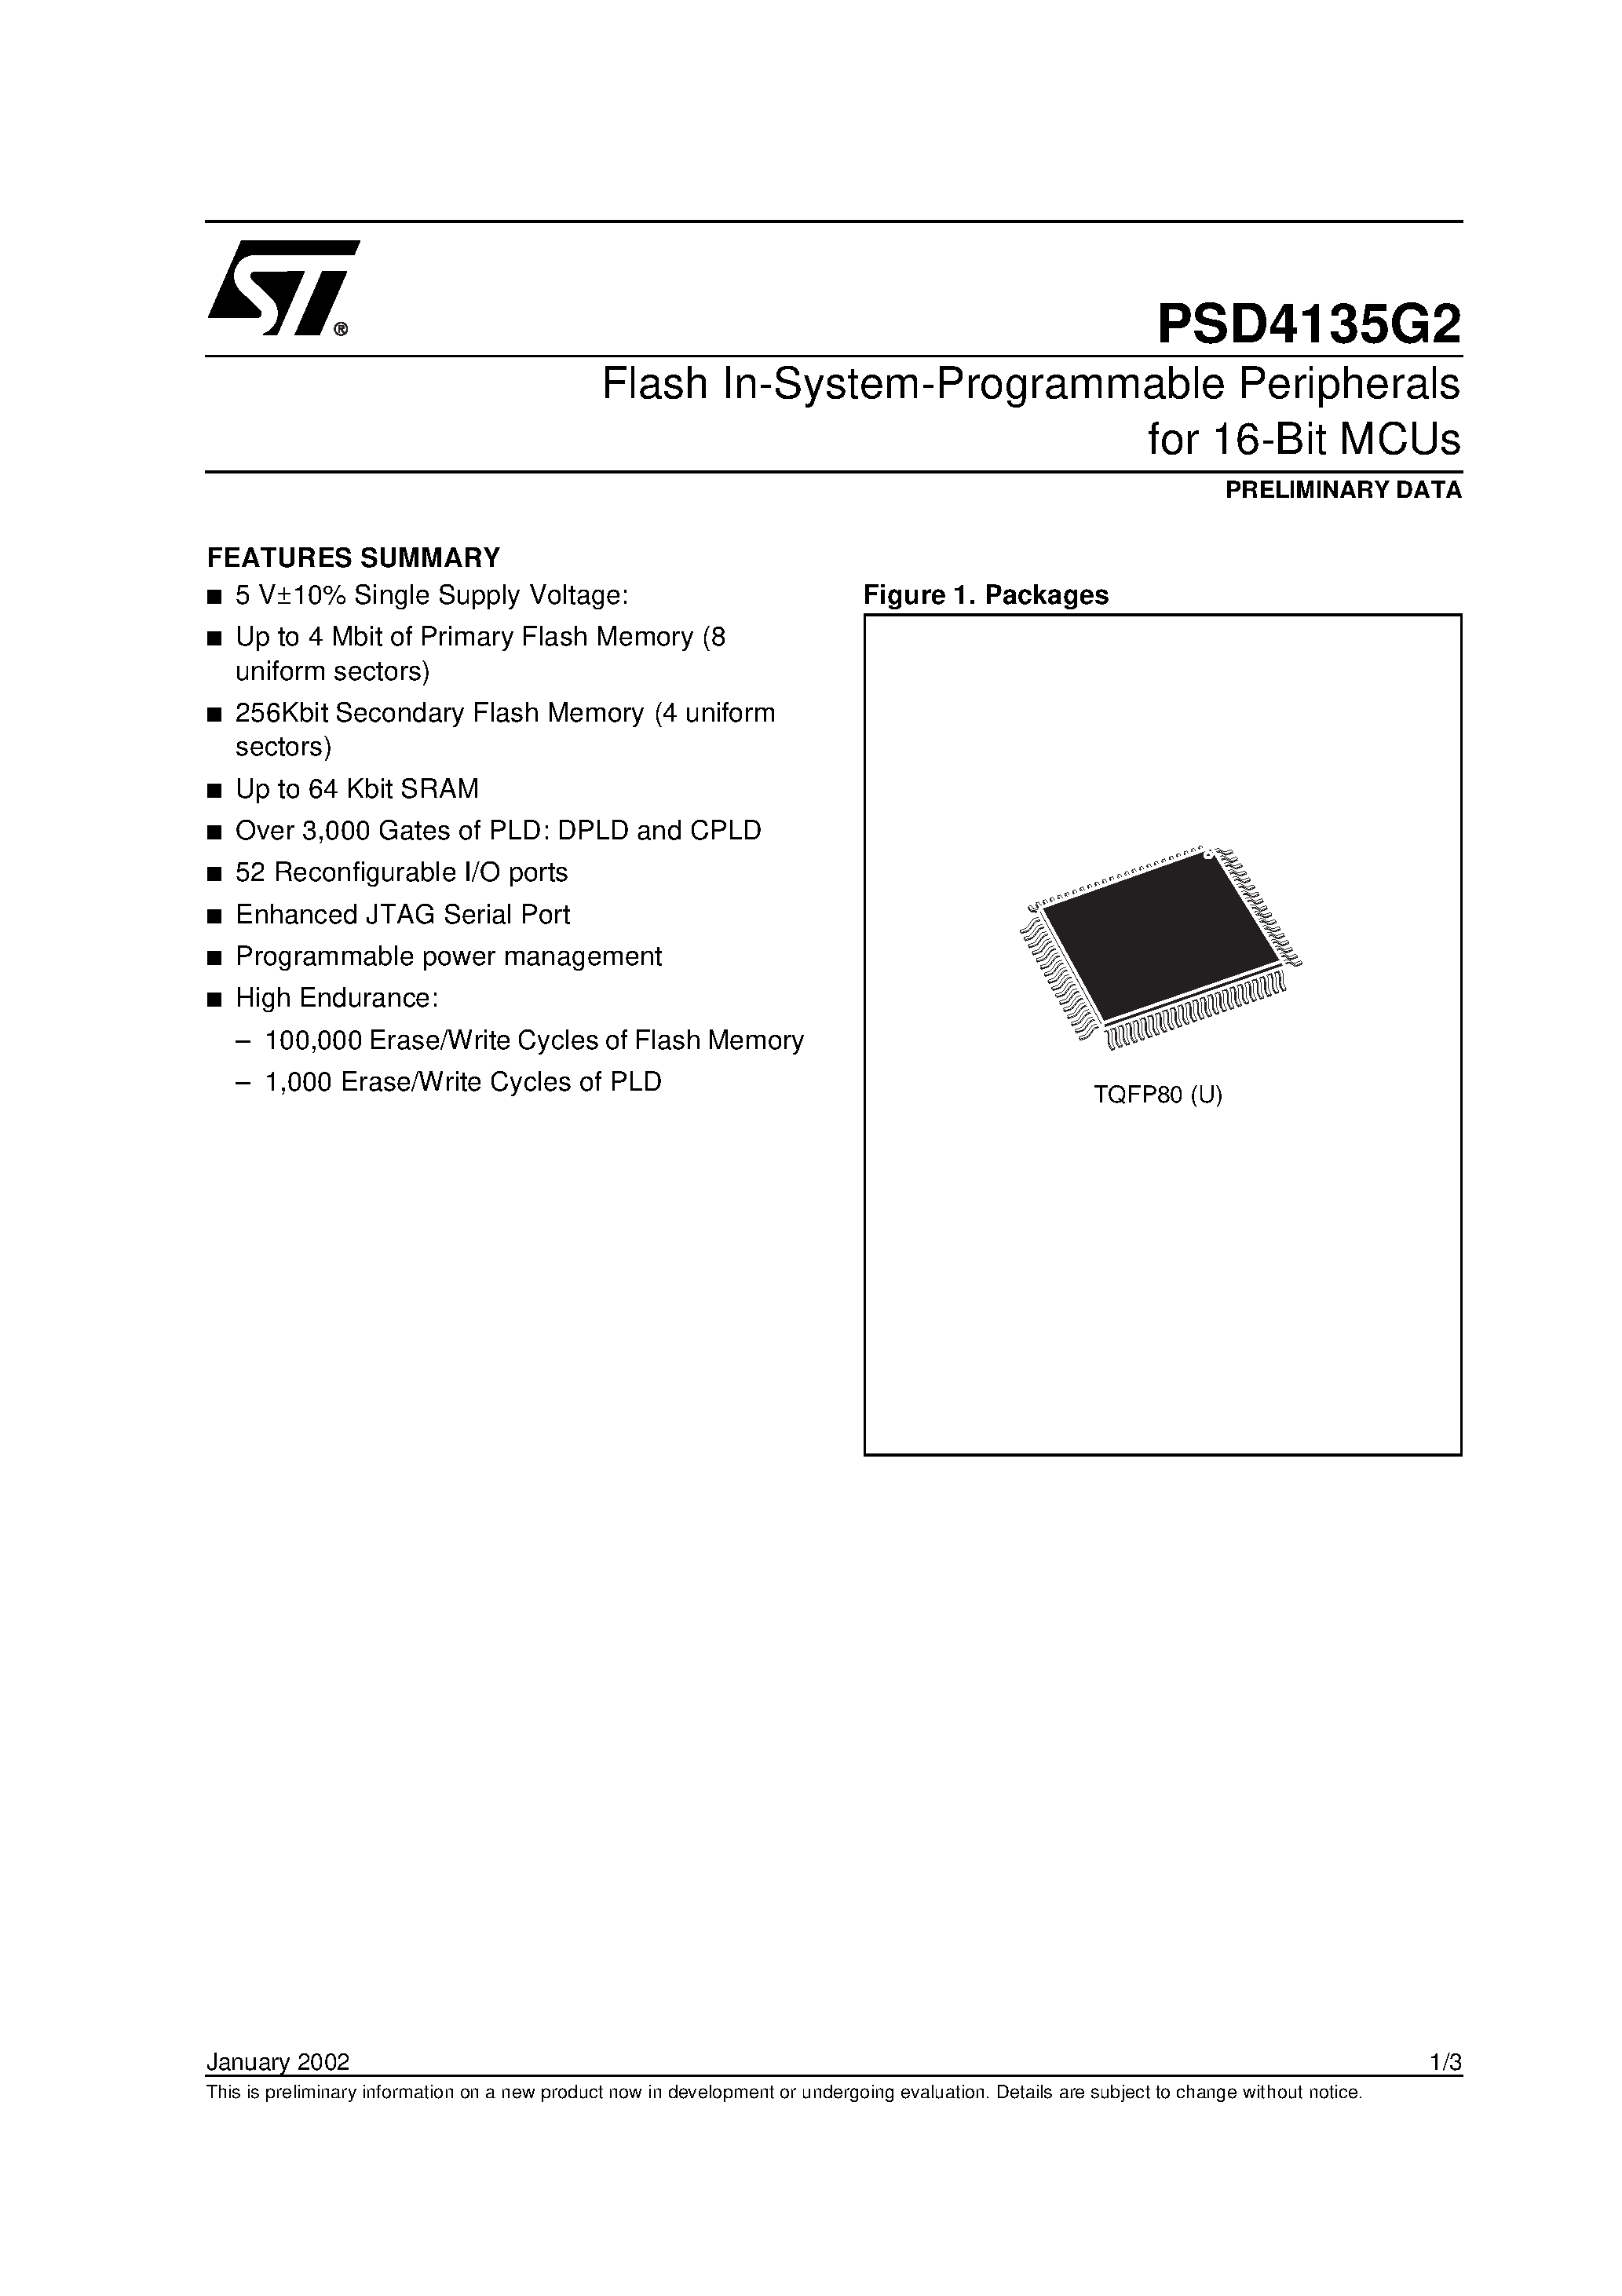 Даташит PSD4135F1-B-12B81I - Flash In-System-Programmable Peripherals for 16-Bit MCUs страница 1